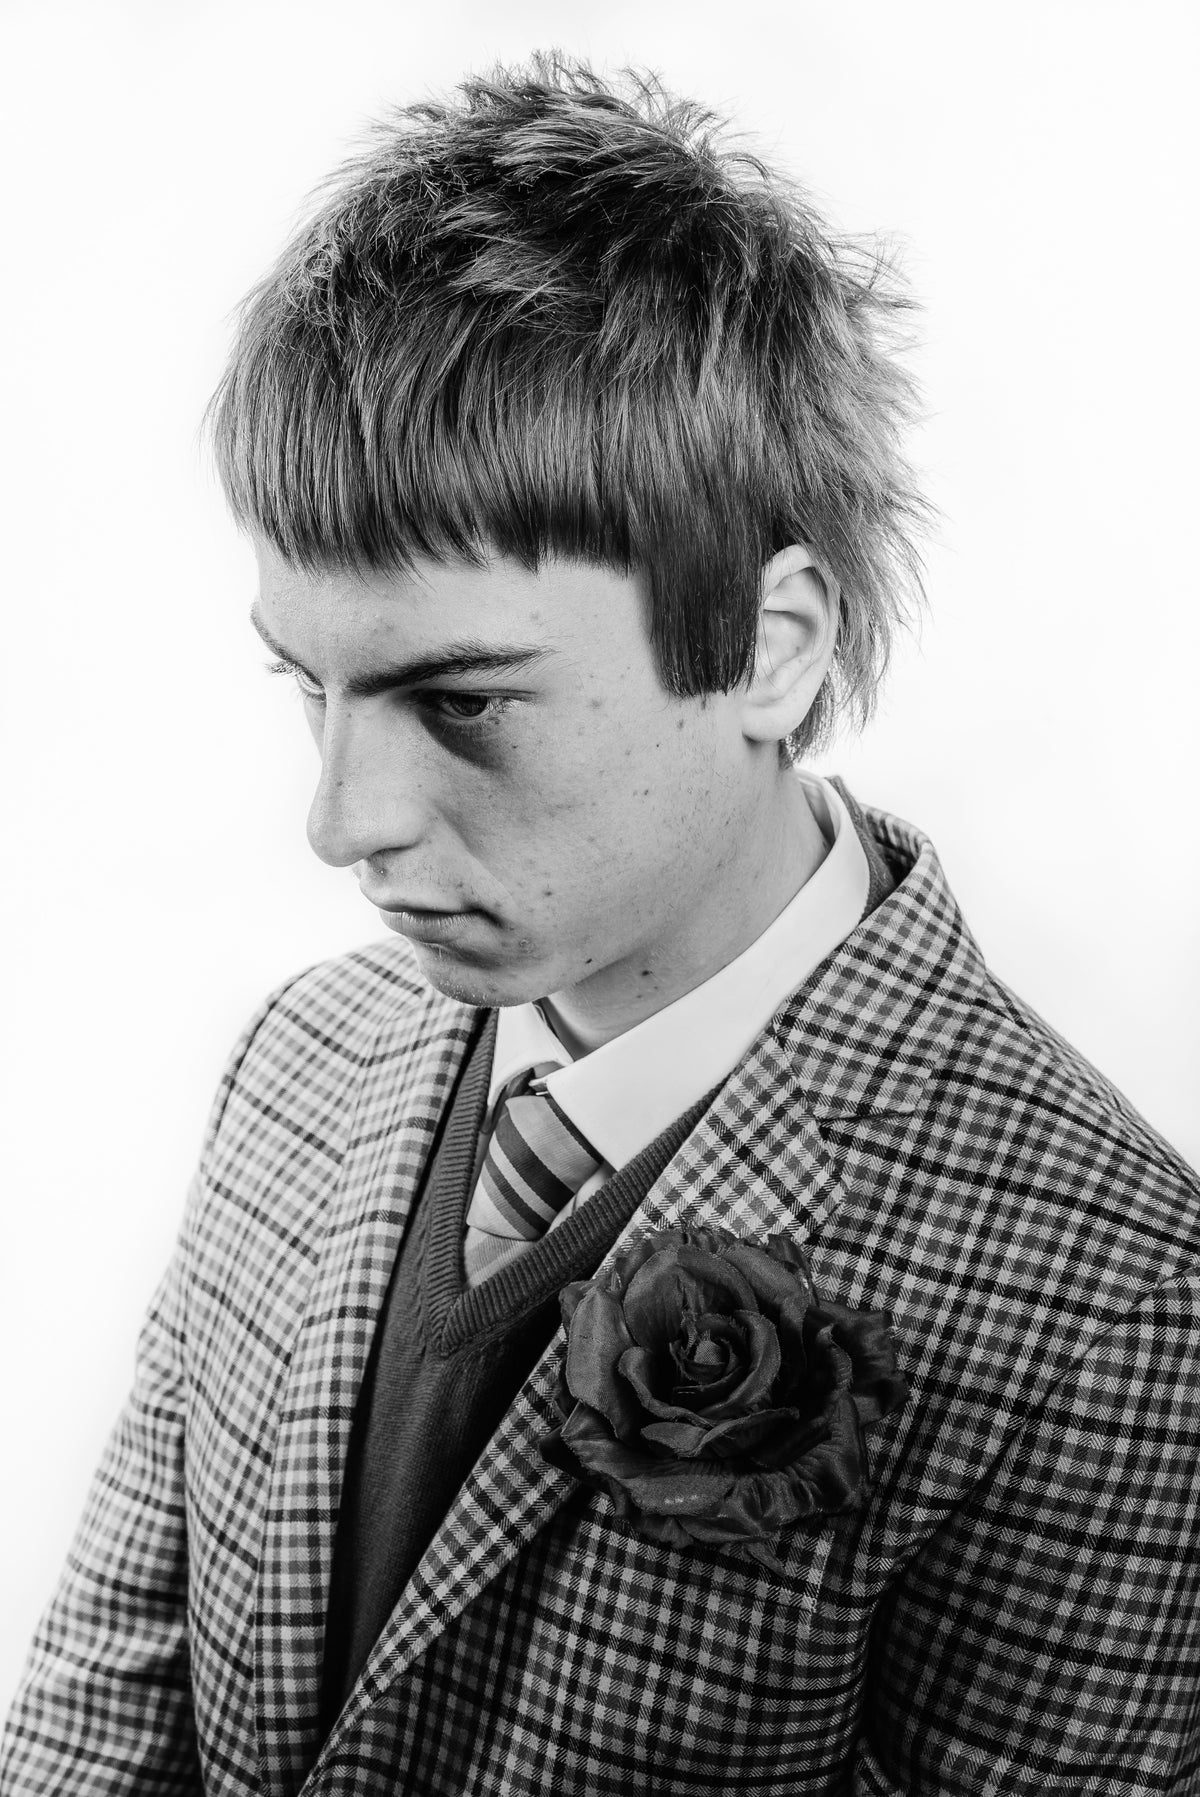 Modernist Society: Get your authentic Paul Weller haircut done by Federico  at Basecuts in Portobello